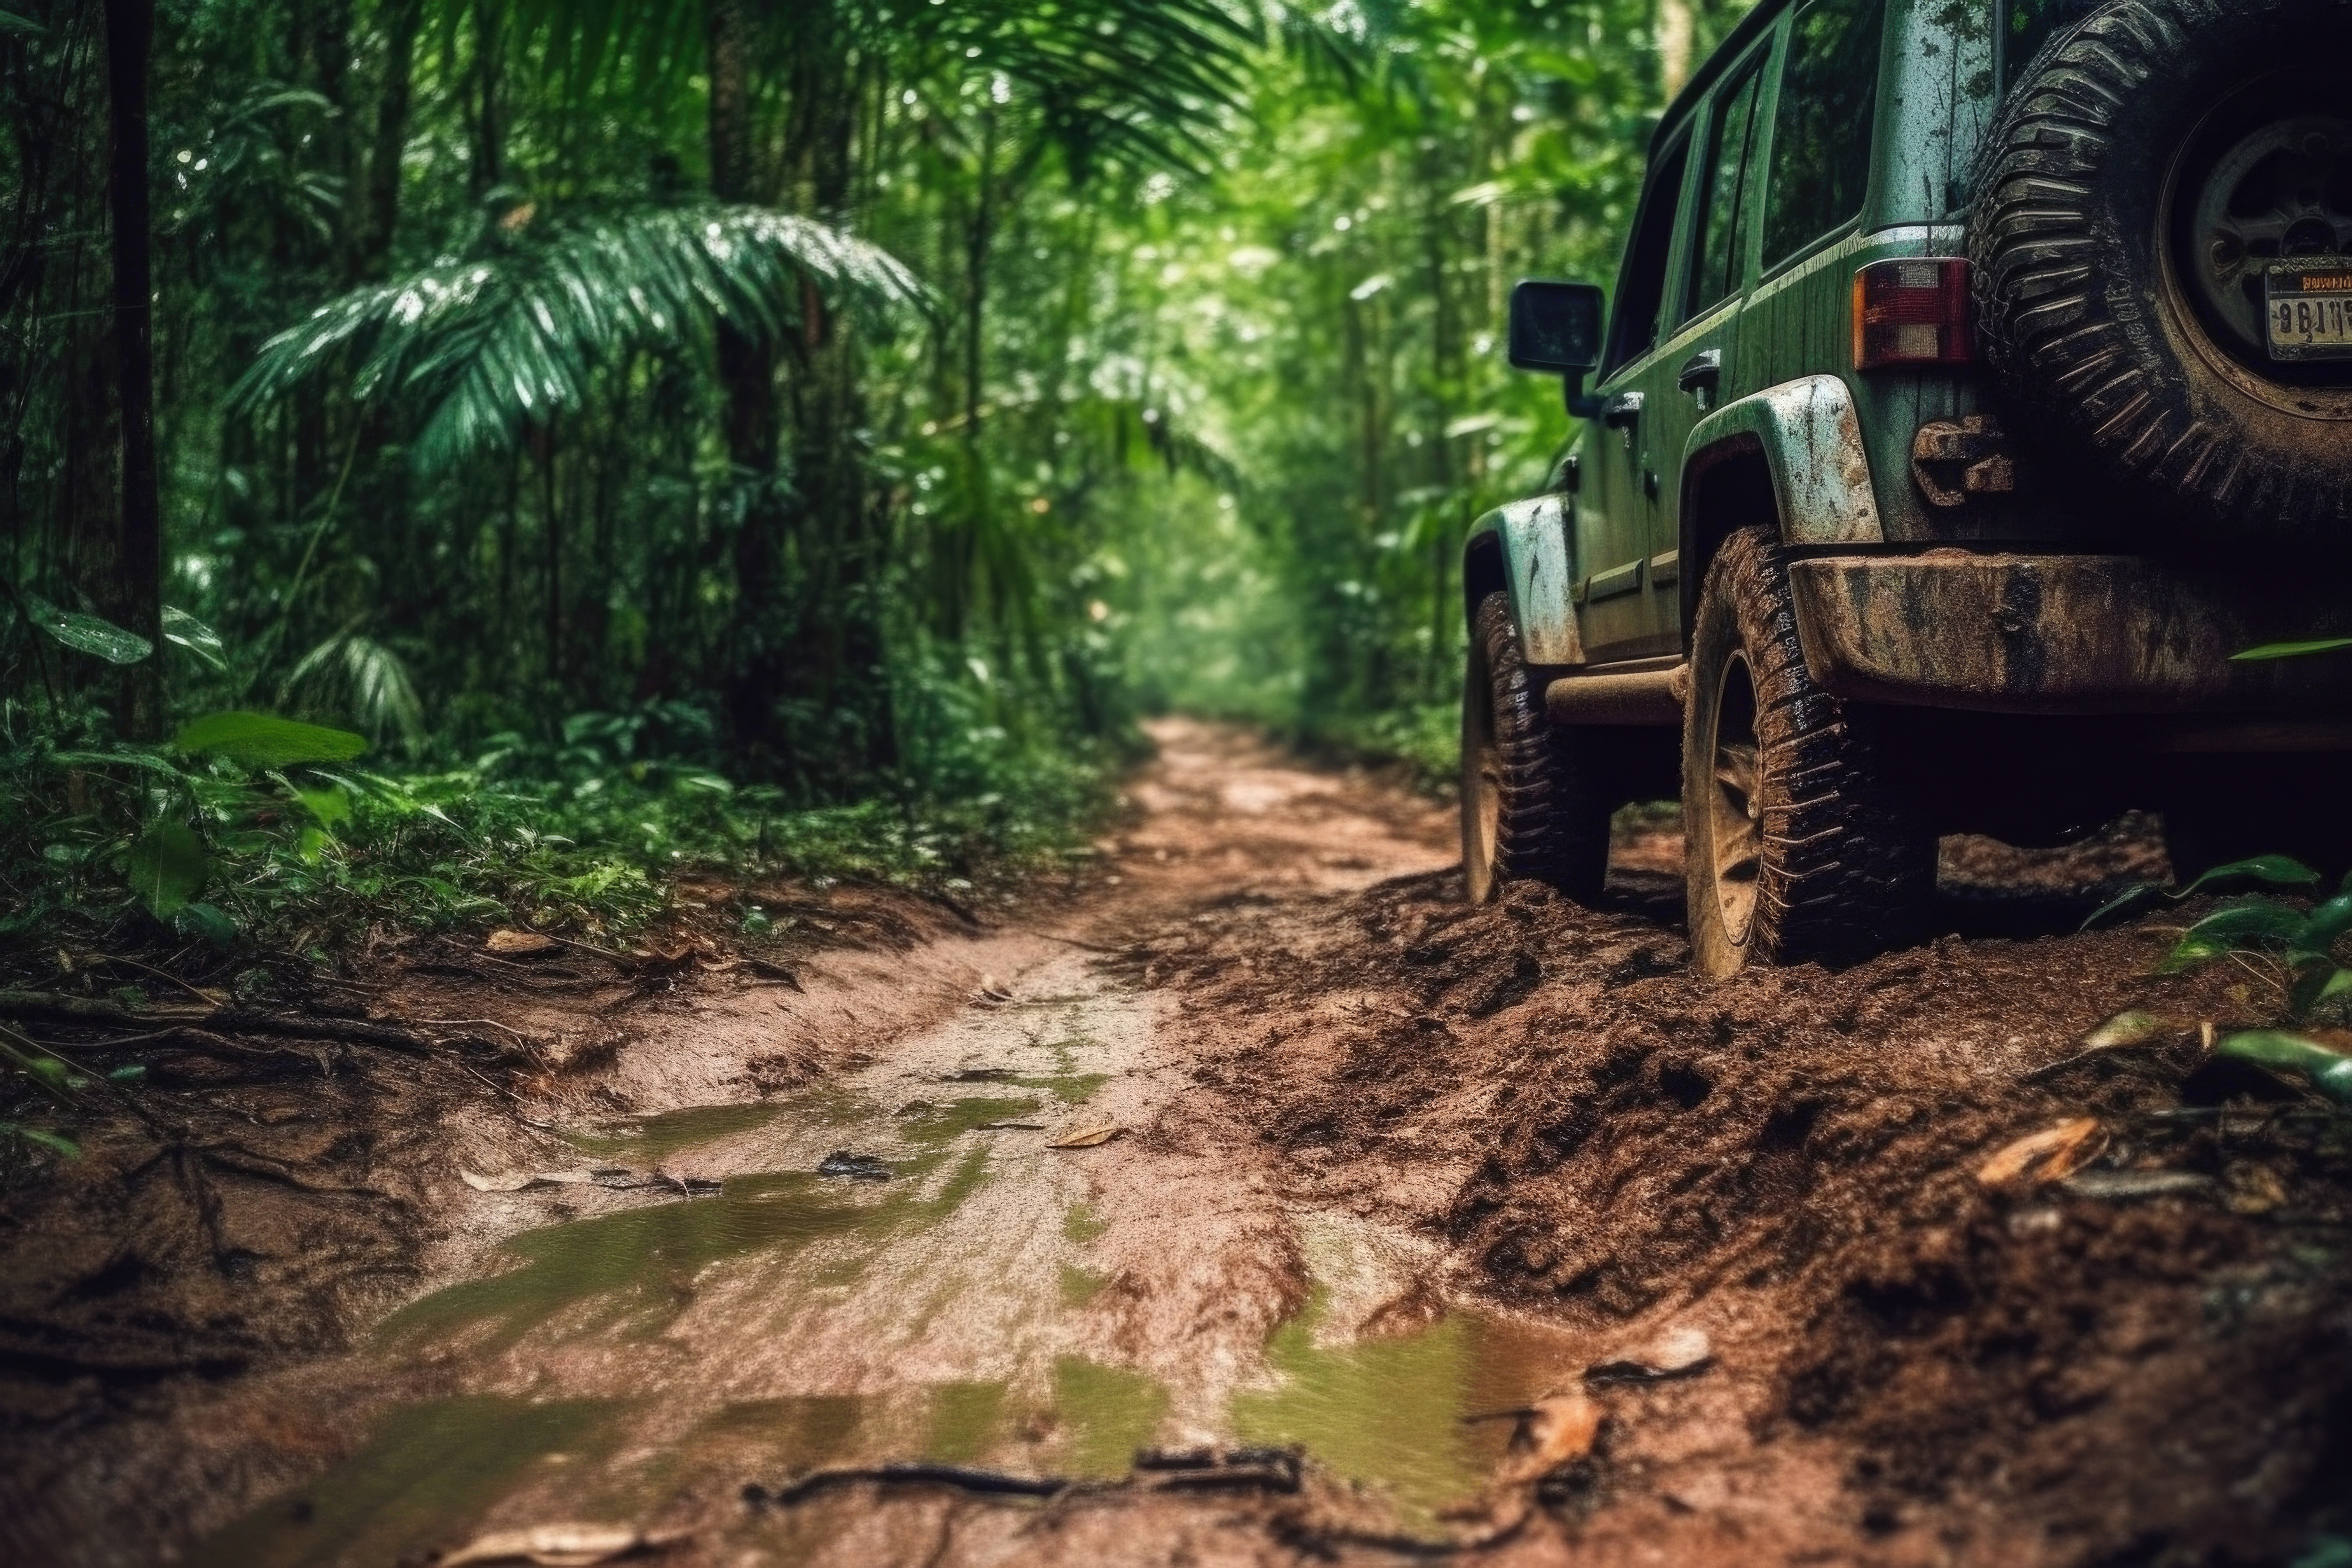 Equipping the Best Tires for Mudding in a Jeep Wrangler